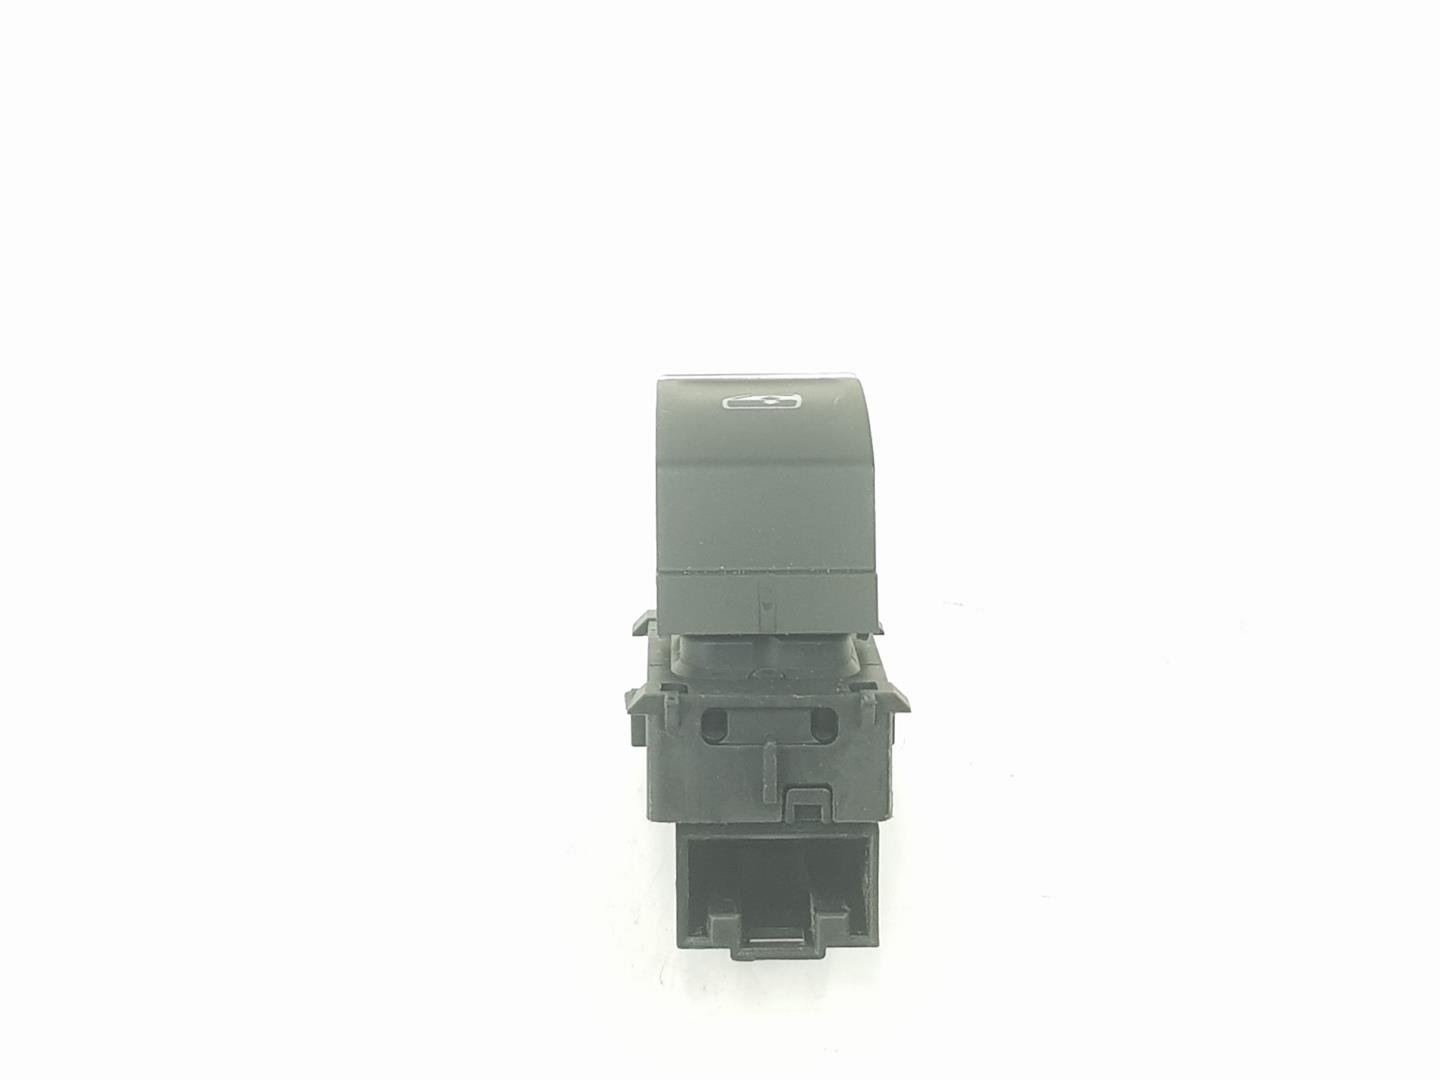 SEAT Alhambra 2 generation (2010-2021) Front Right Door Window Switch 5G0959855N, 5G0959855N 24237610